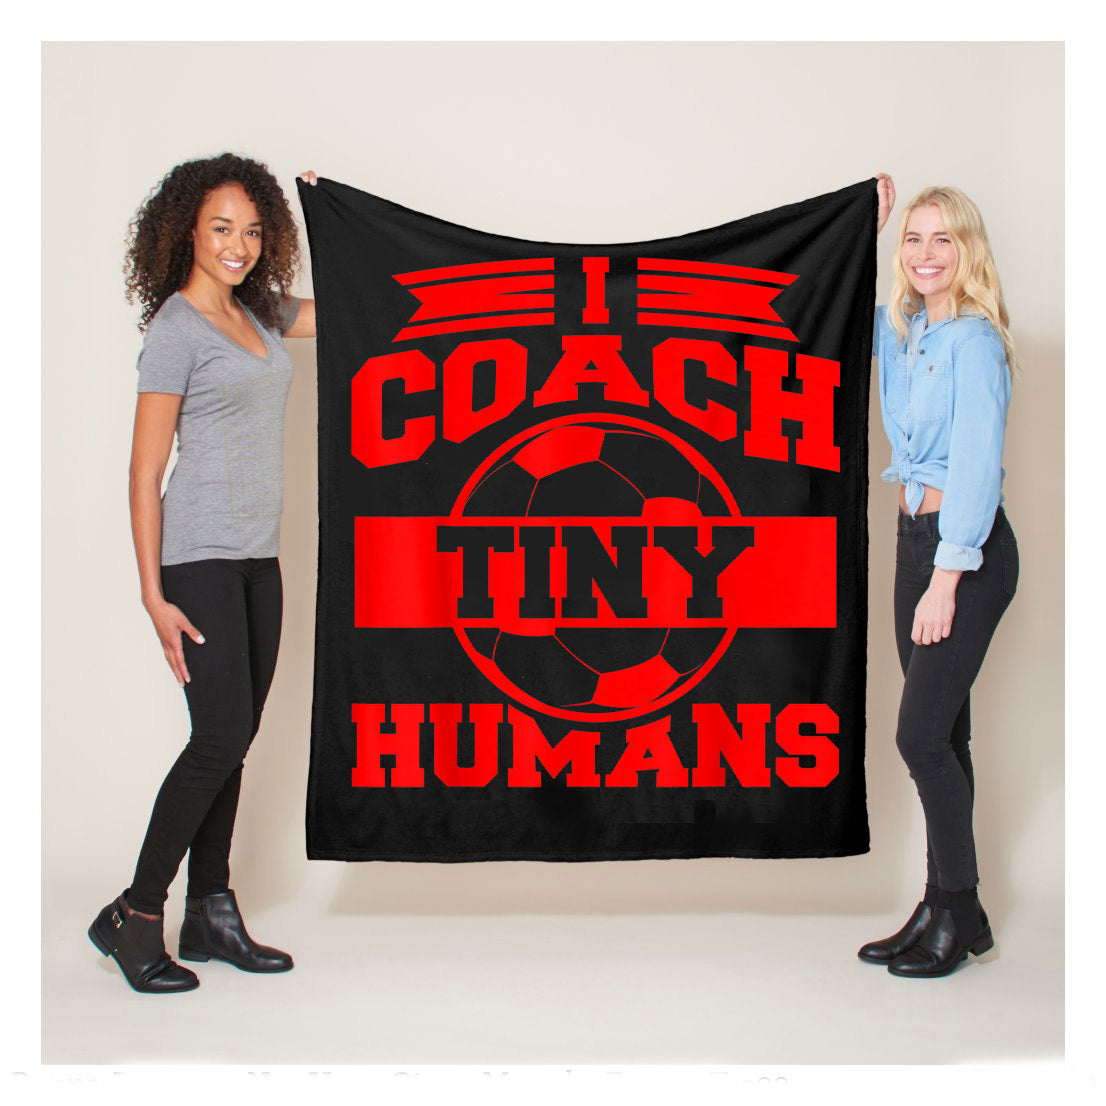 I Coach Tiny Humans Soccer Sport Teacher Distressed Sherpa Blanket,  Soccer Outdoor Blankets, Soccer Gifts For Coach And Soccer Players, Birthday Gift For Soccer Player